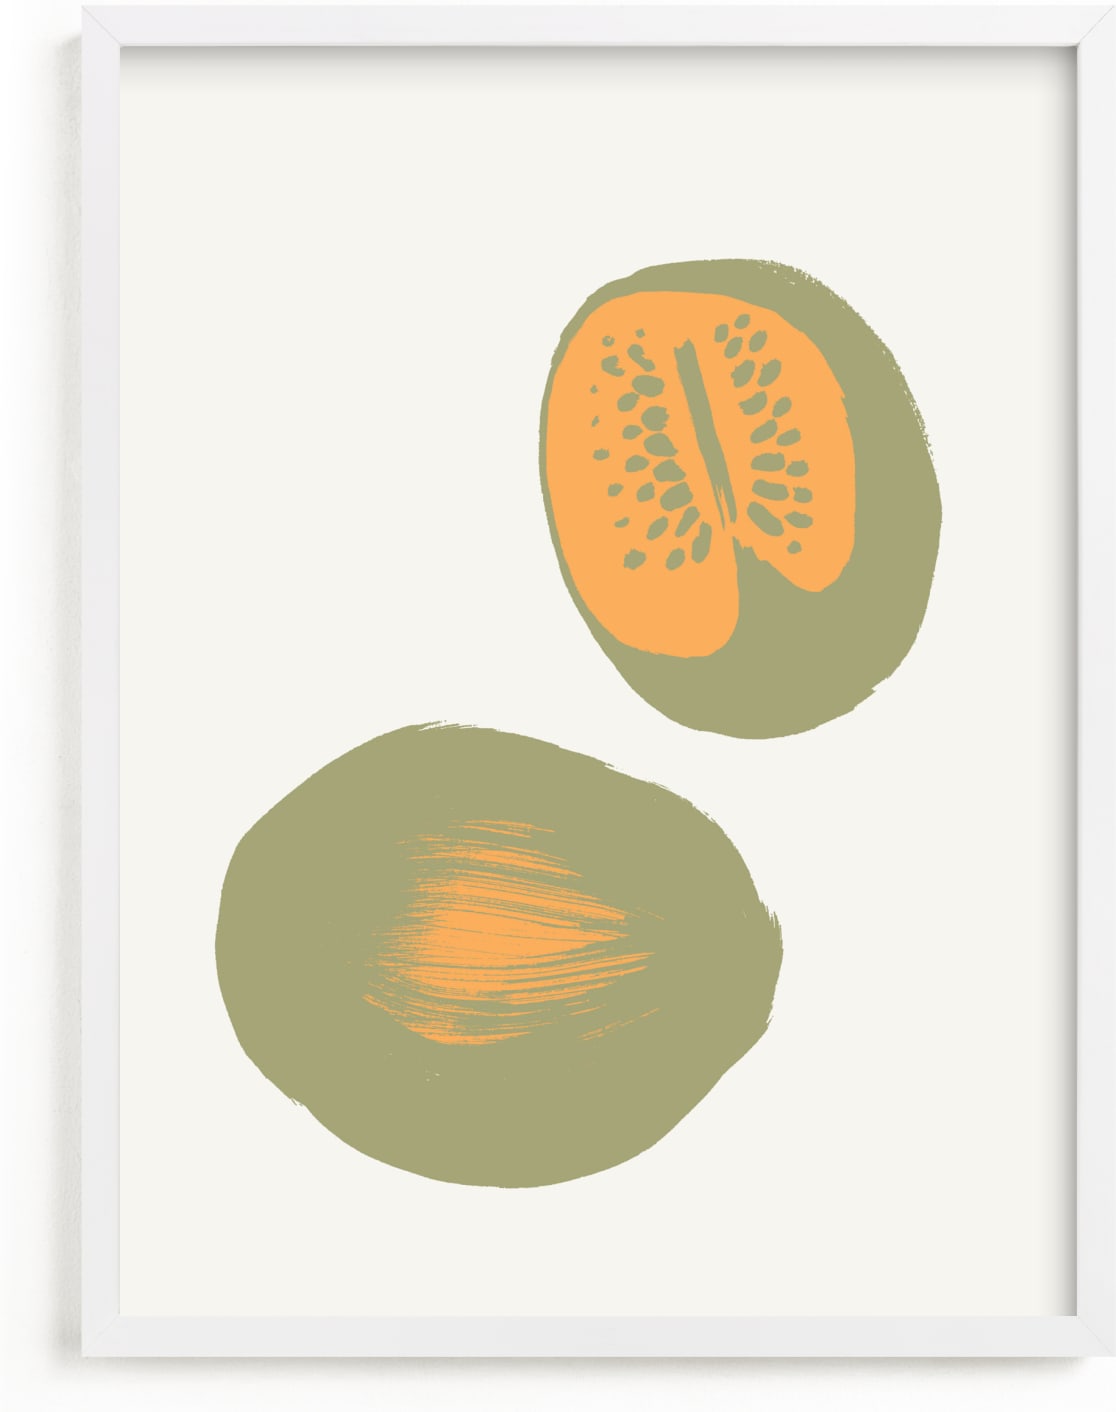 This is a orange art by Sonya Percival called Watermelons.